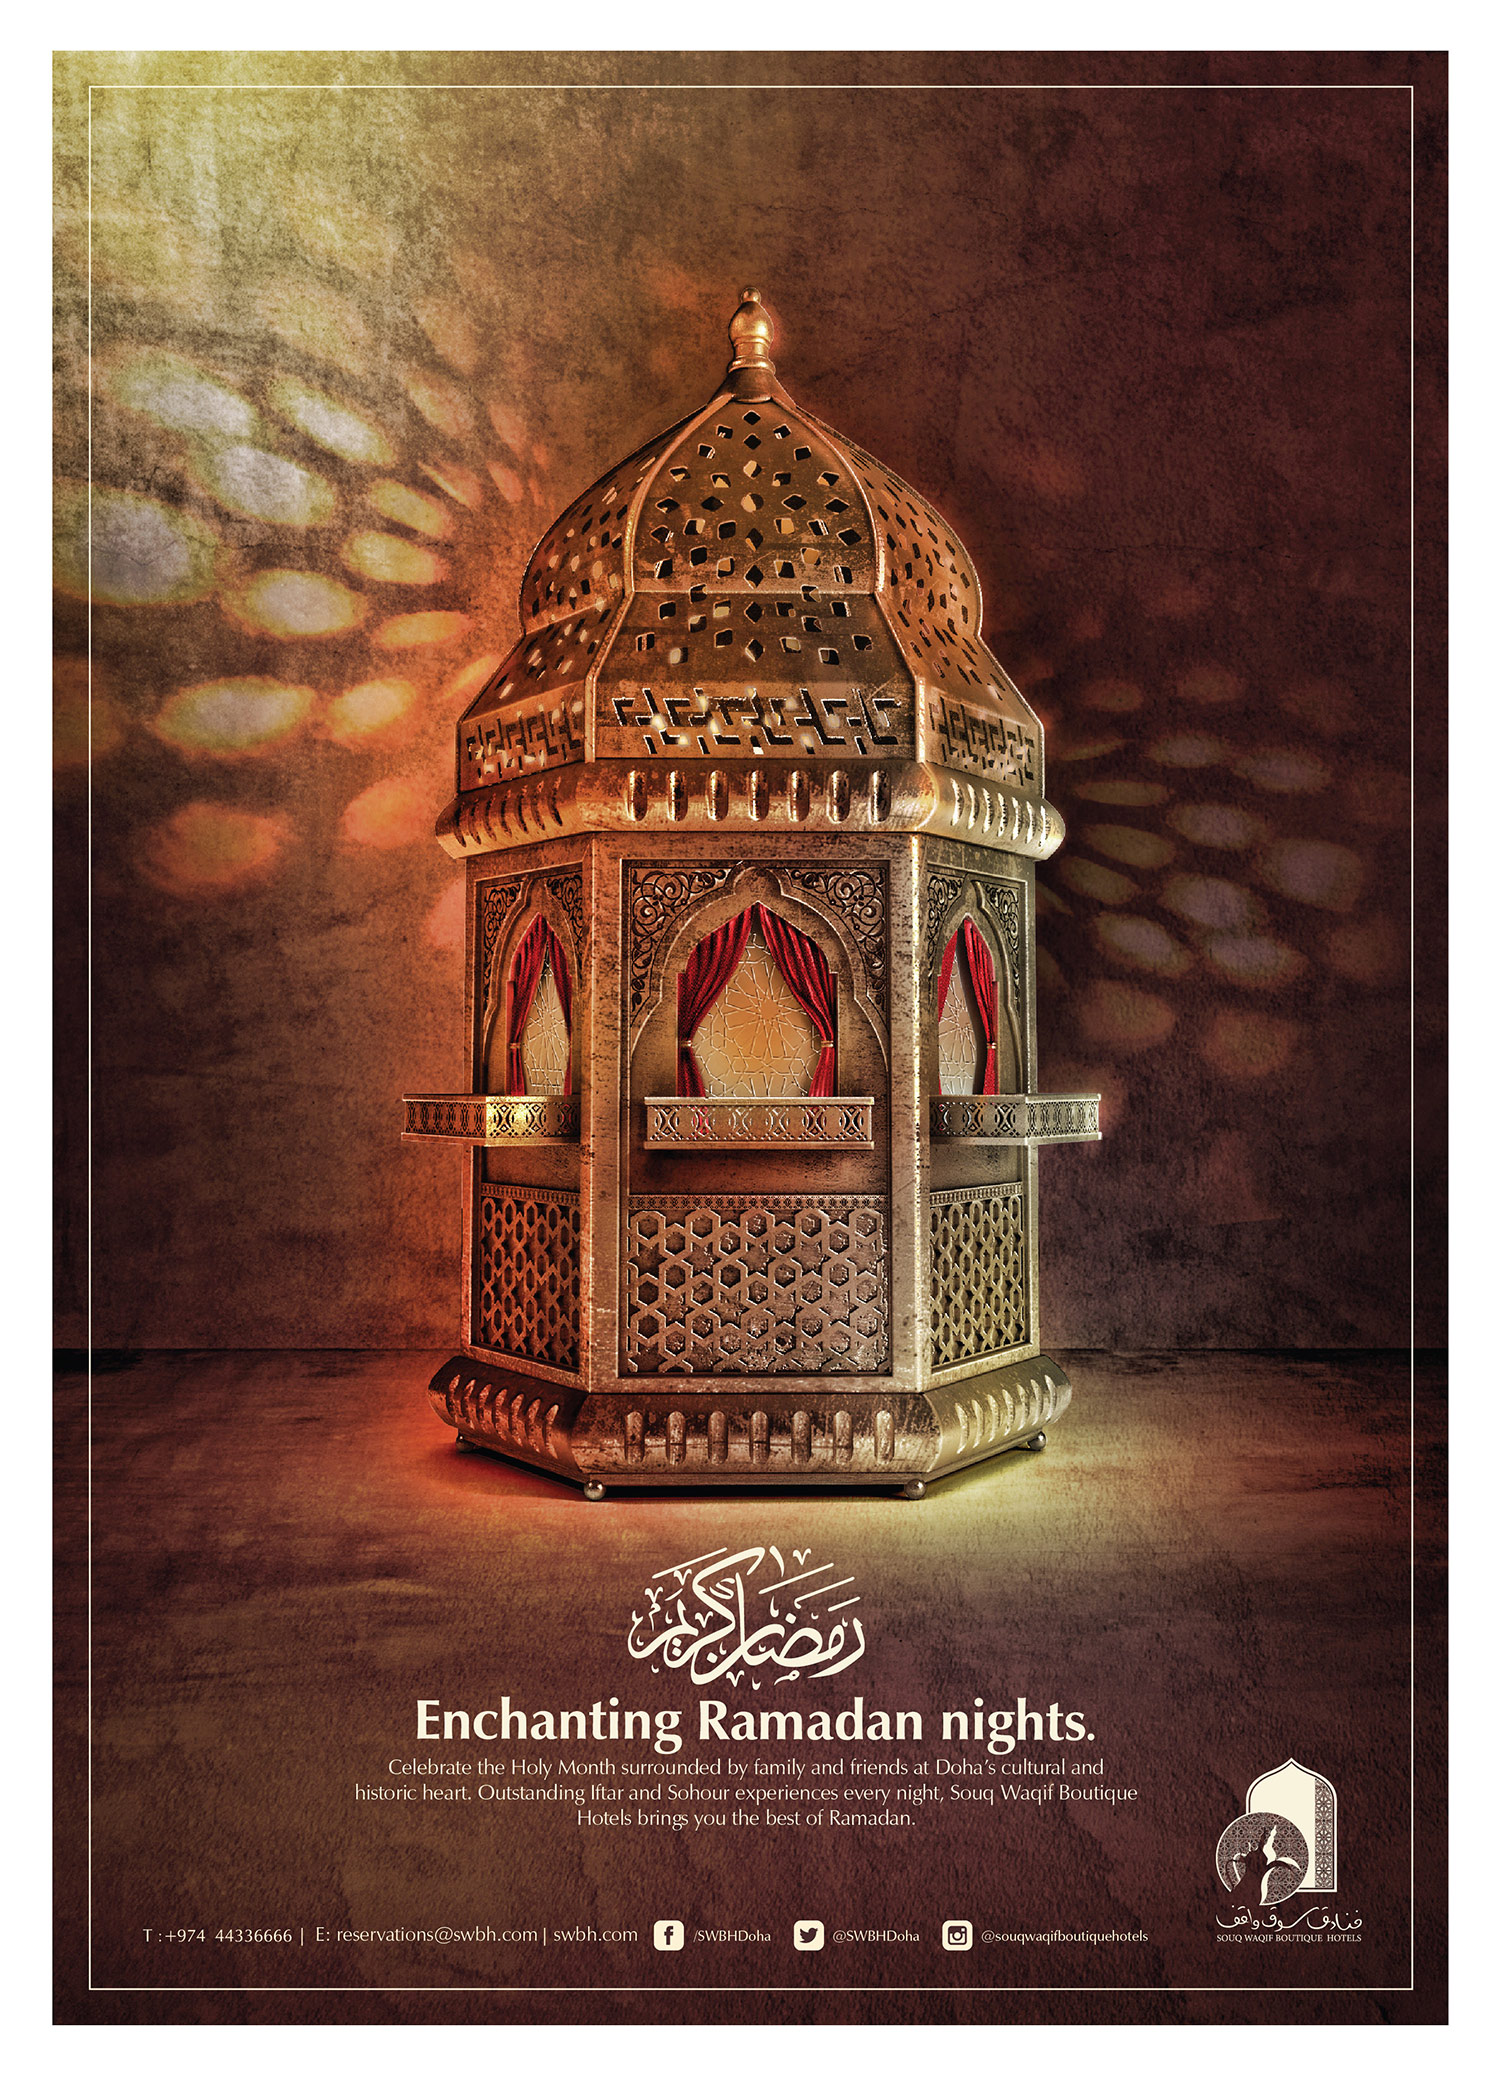 Enchanting Ramadan Nights. Enchanting Ramadan Nights. Campaigns of the World®